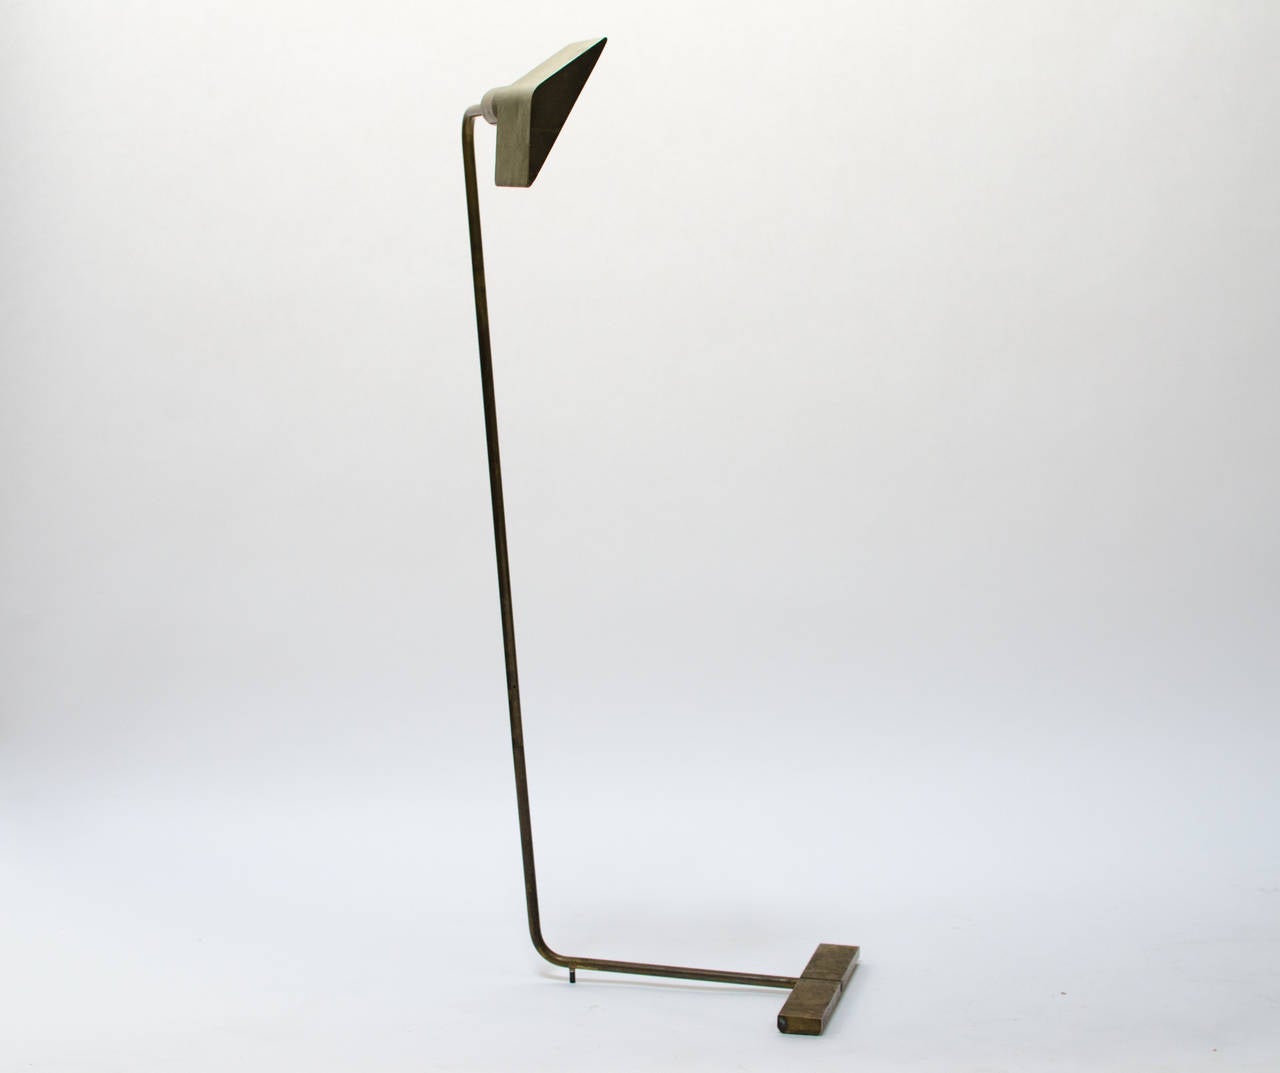 Early Cedric Hartman brass floor lamp model # 1UWV comprising of a swiveling pyramid shade with dimmer switch that cantilevers on a rotating stem with a weighted base. American, c. 1960s. Offered as found with original patina, can be polished to a